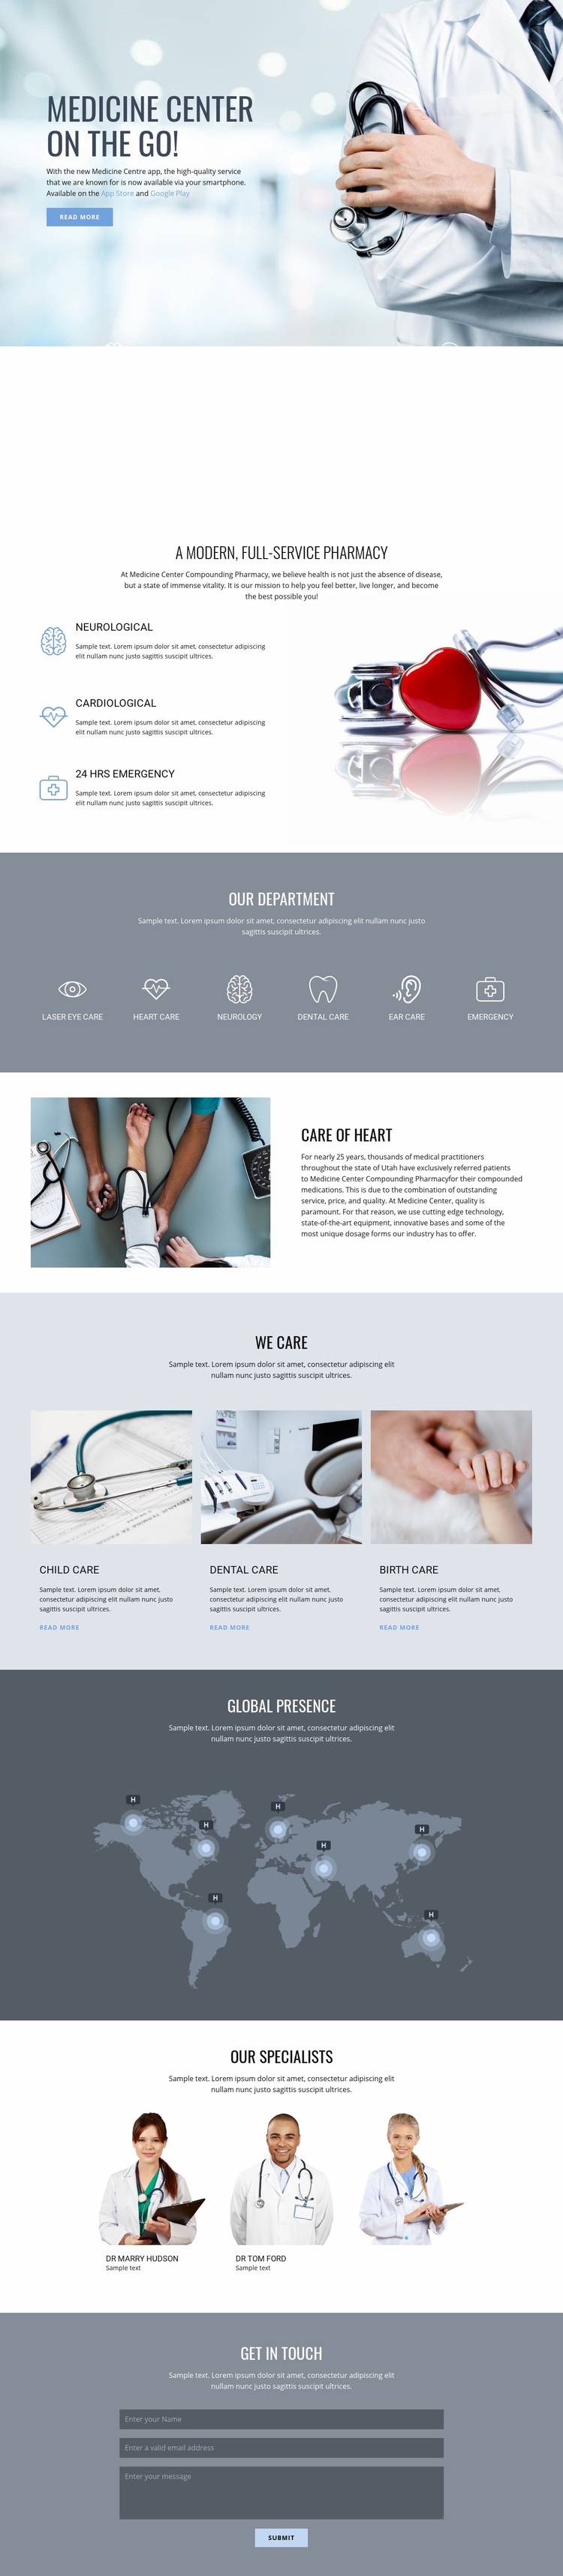 Pharmacy and medicine Web Page Design